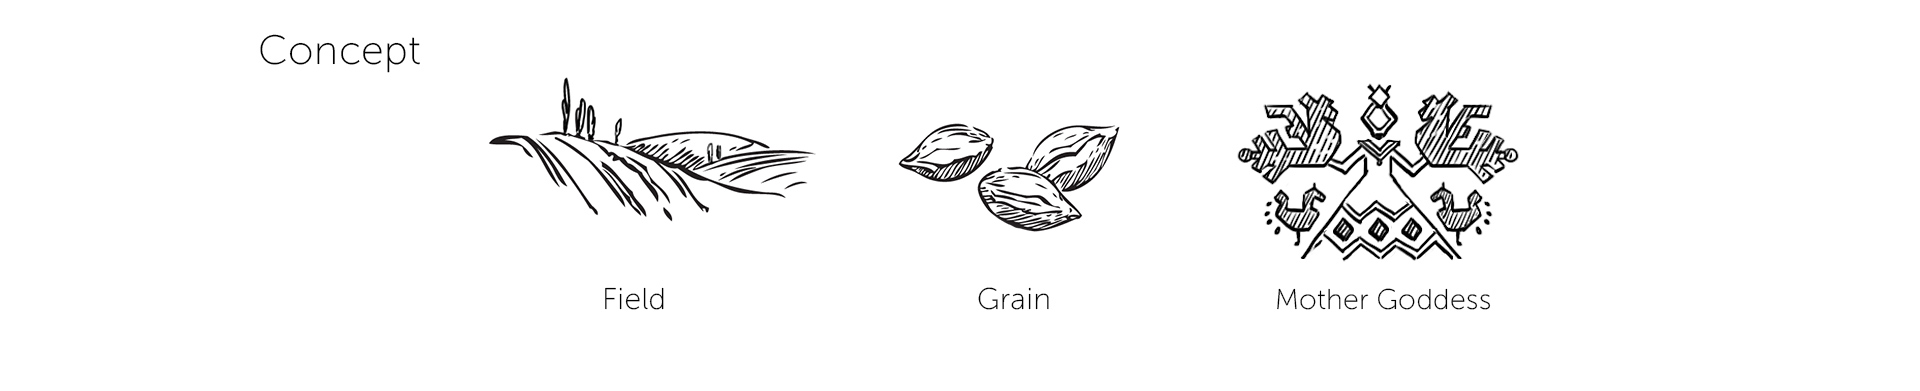 The trademark concept components include field, grain, and Mother Goddess